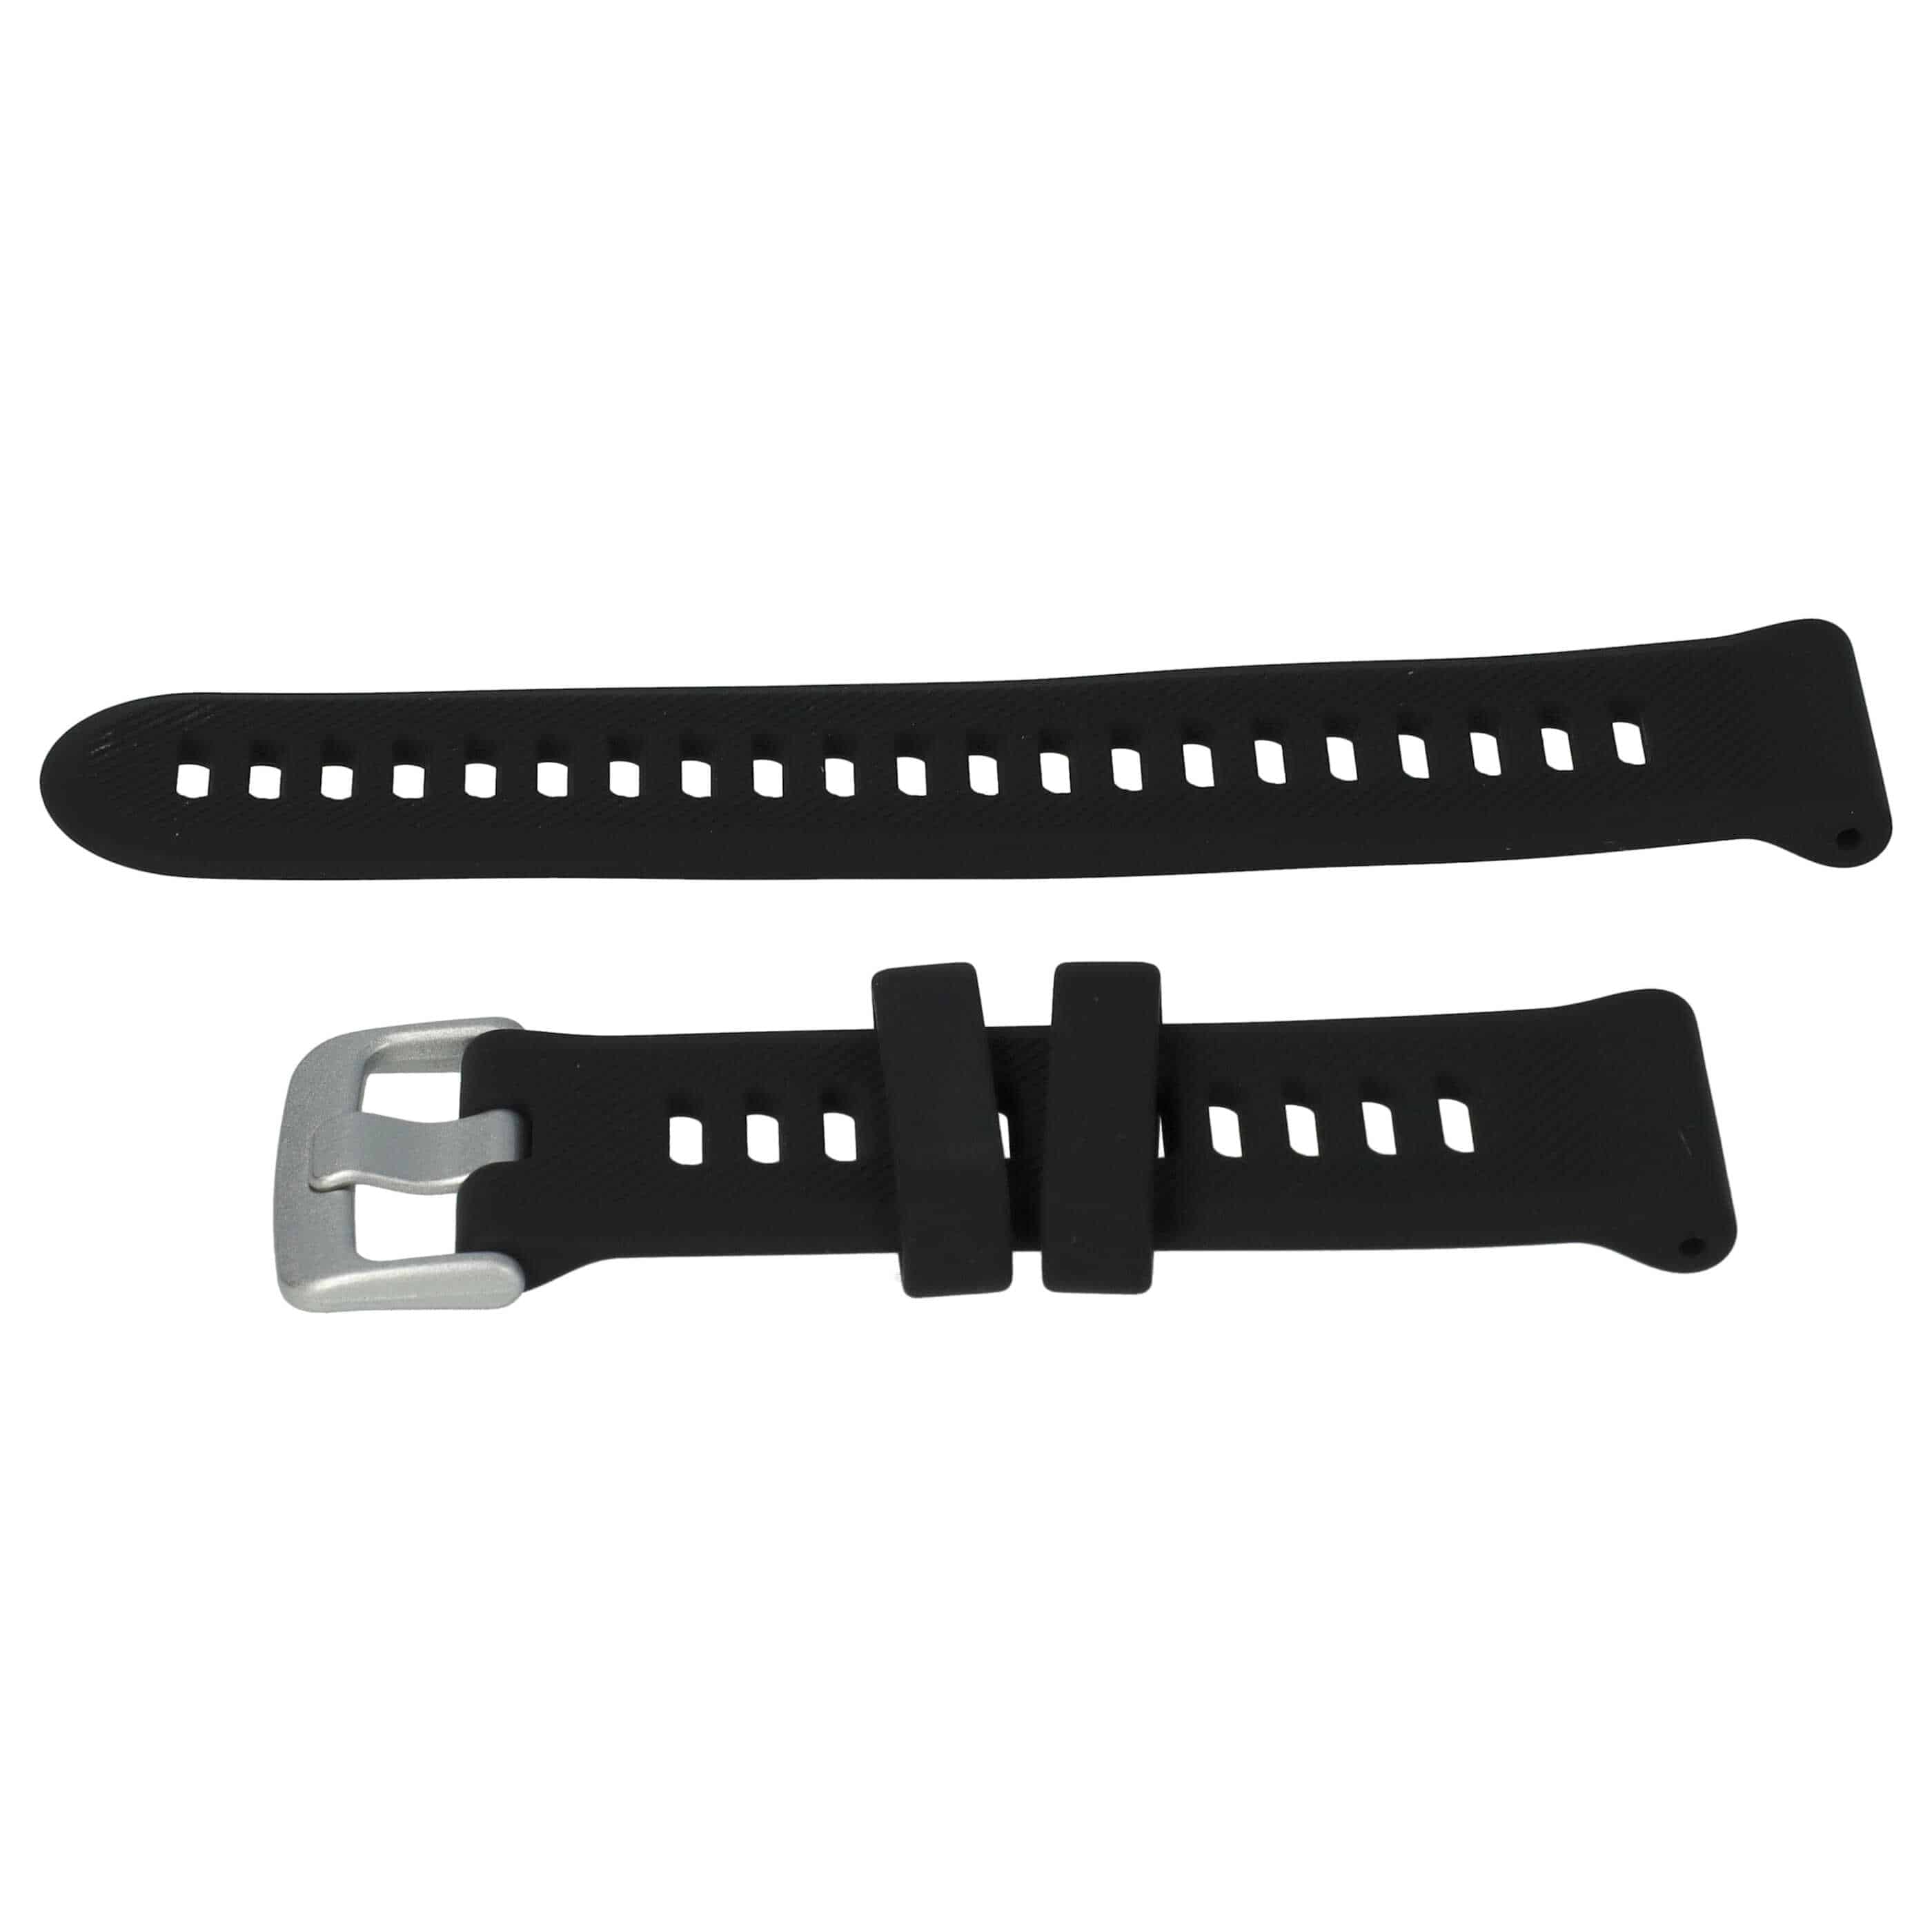 wristband for Garmin Forerunner Smartwatch - 9 + 12.2 cm long, 22mm wide, silicone, black